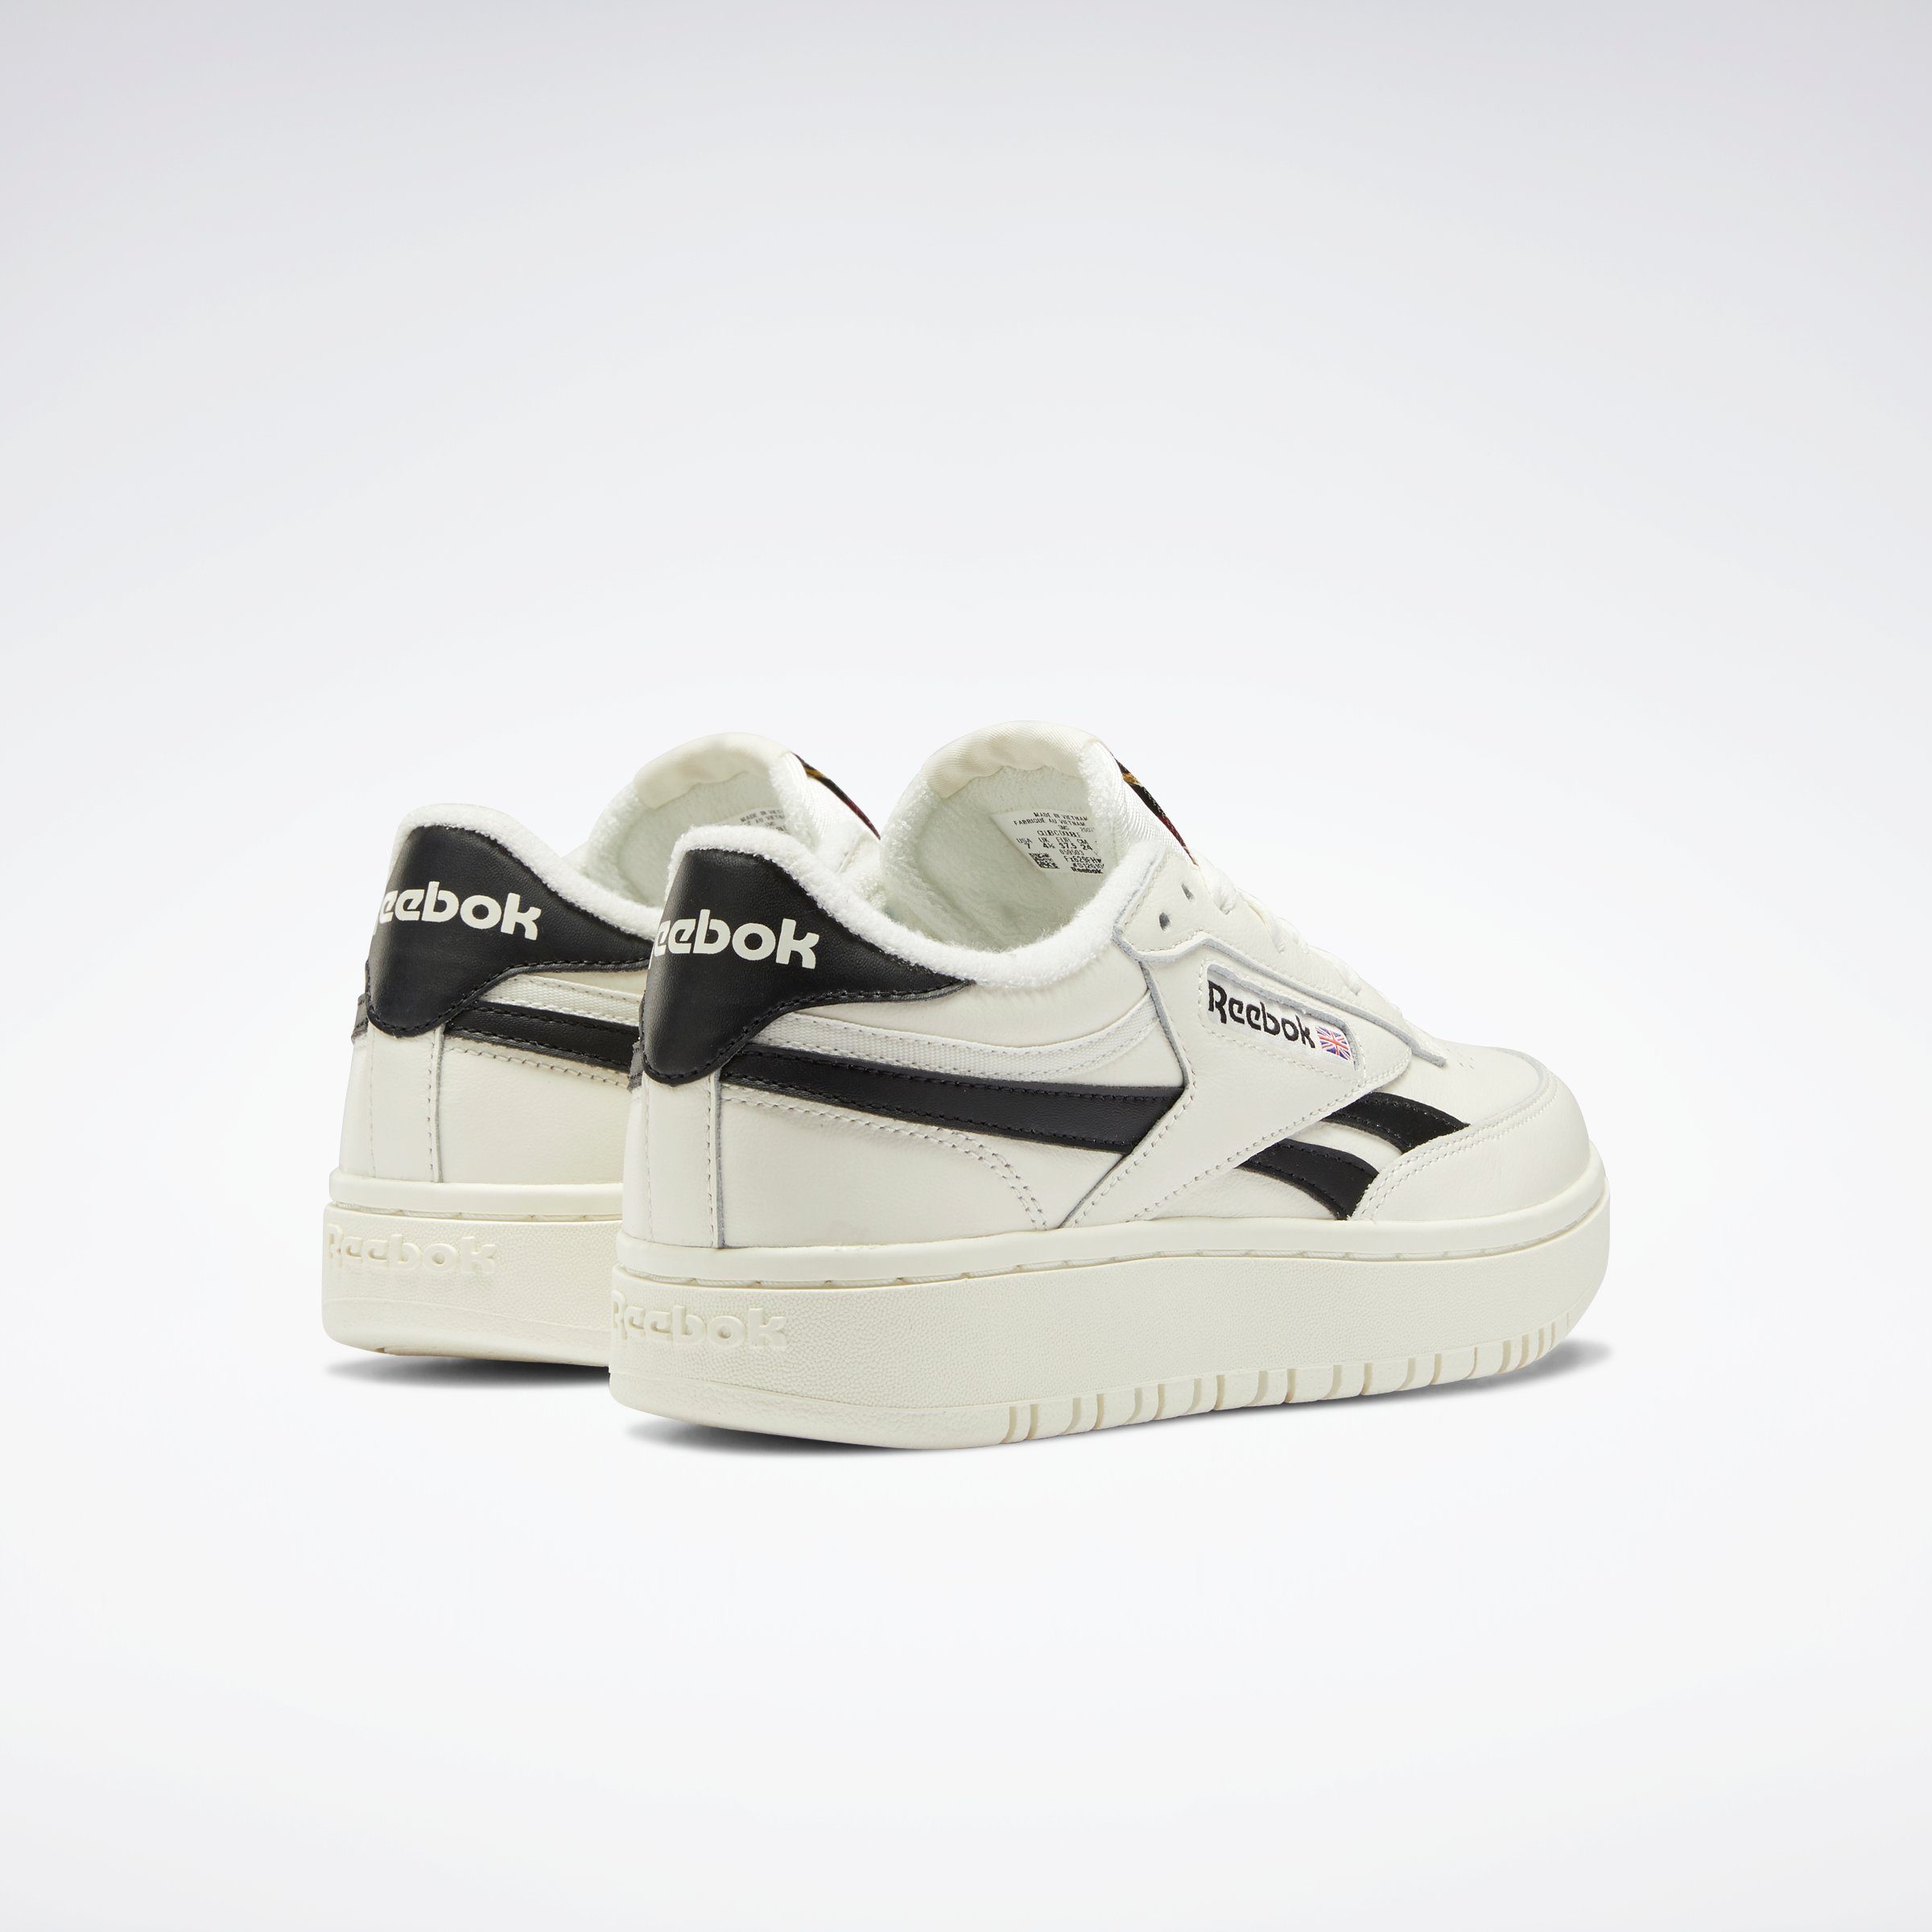 C Classic DOUBLE CLUB Reebok Plateausneaker offwhite